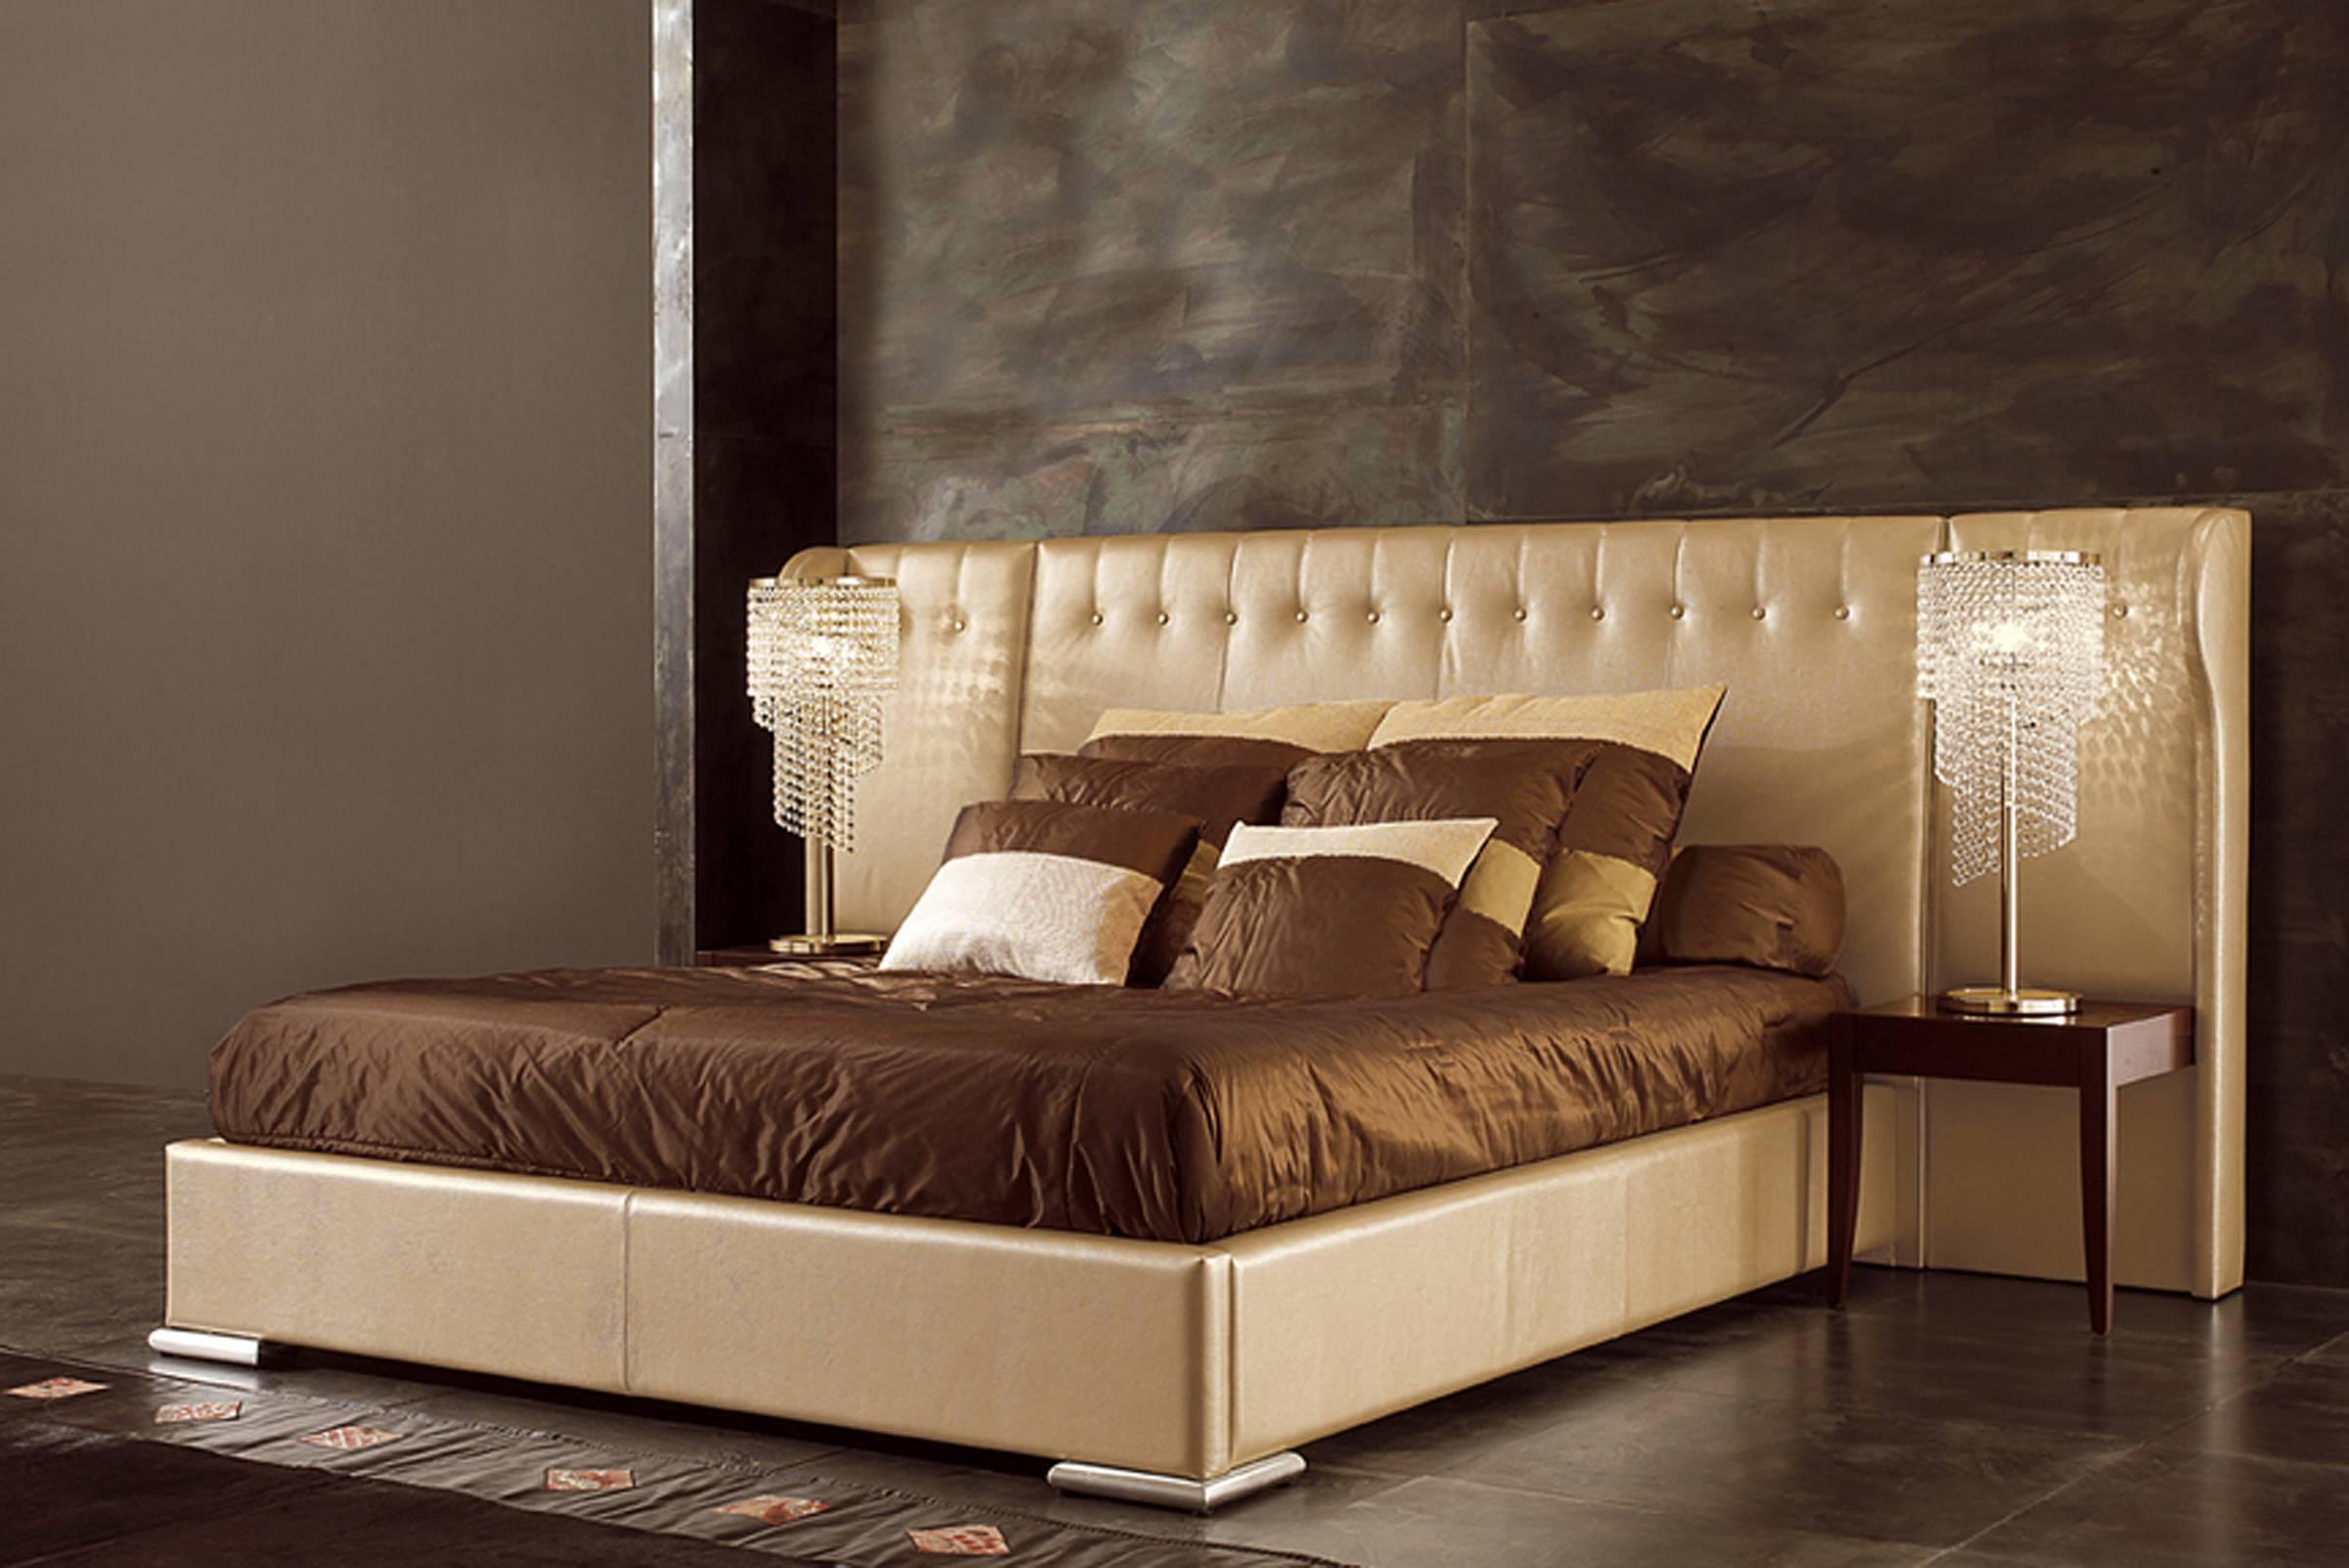 Hand-Crafted Parma Bed with High Quality Fabric and Night Table Finishing Leather For Sale